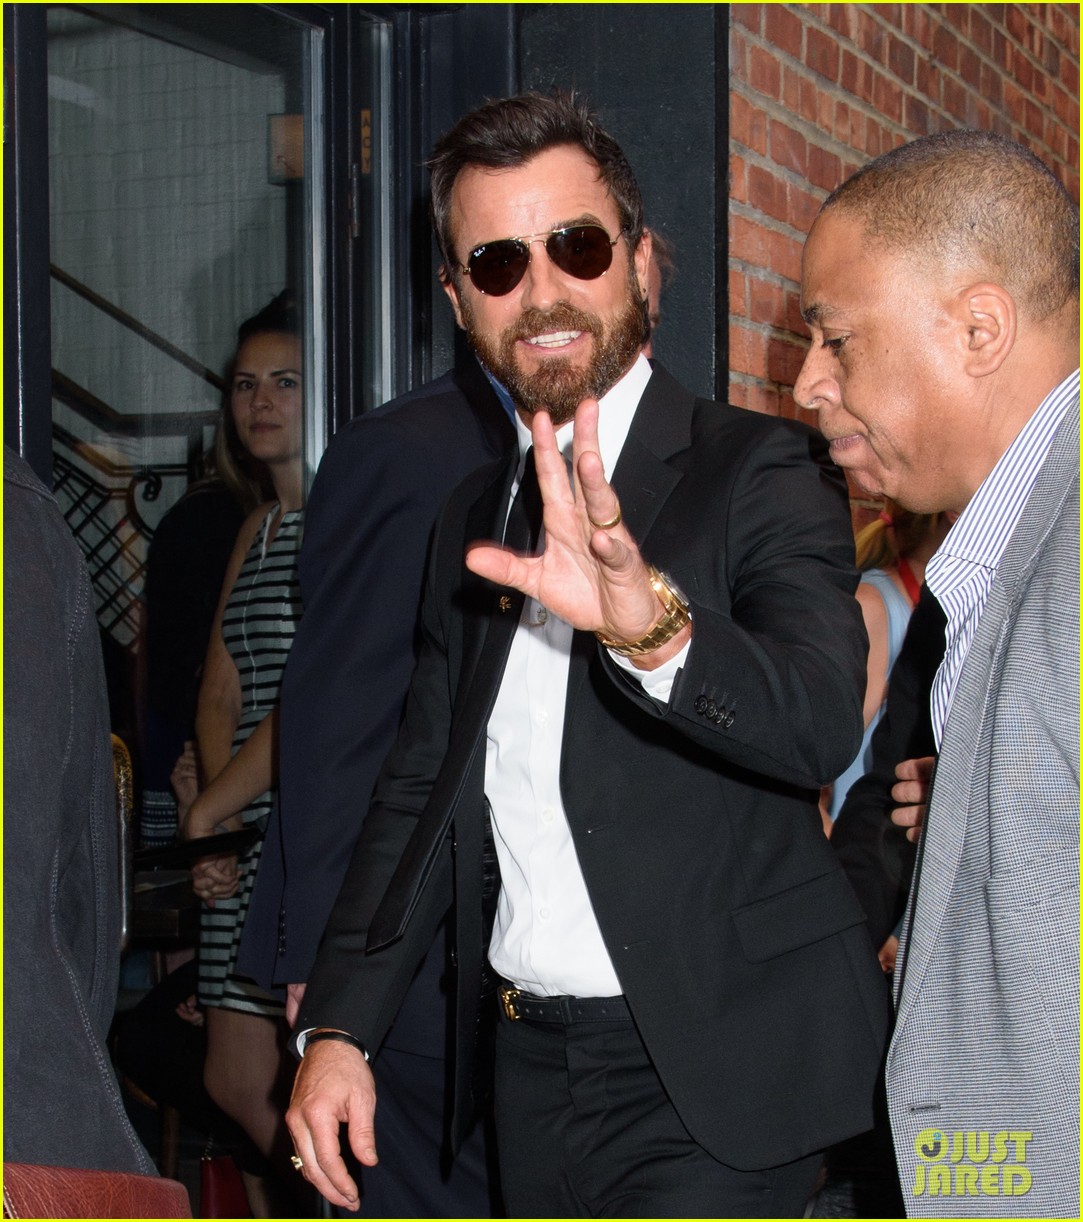 justin theroux attends the series finale screening of the leftovers in nyc01